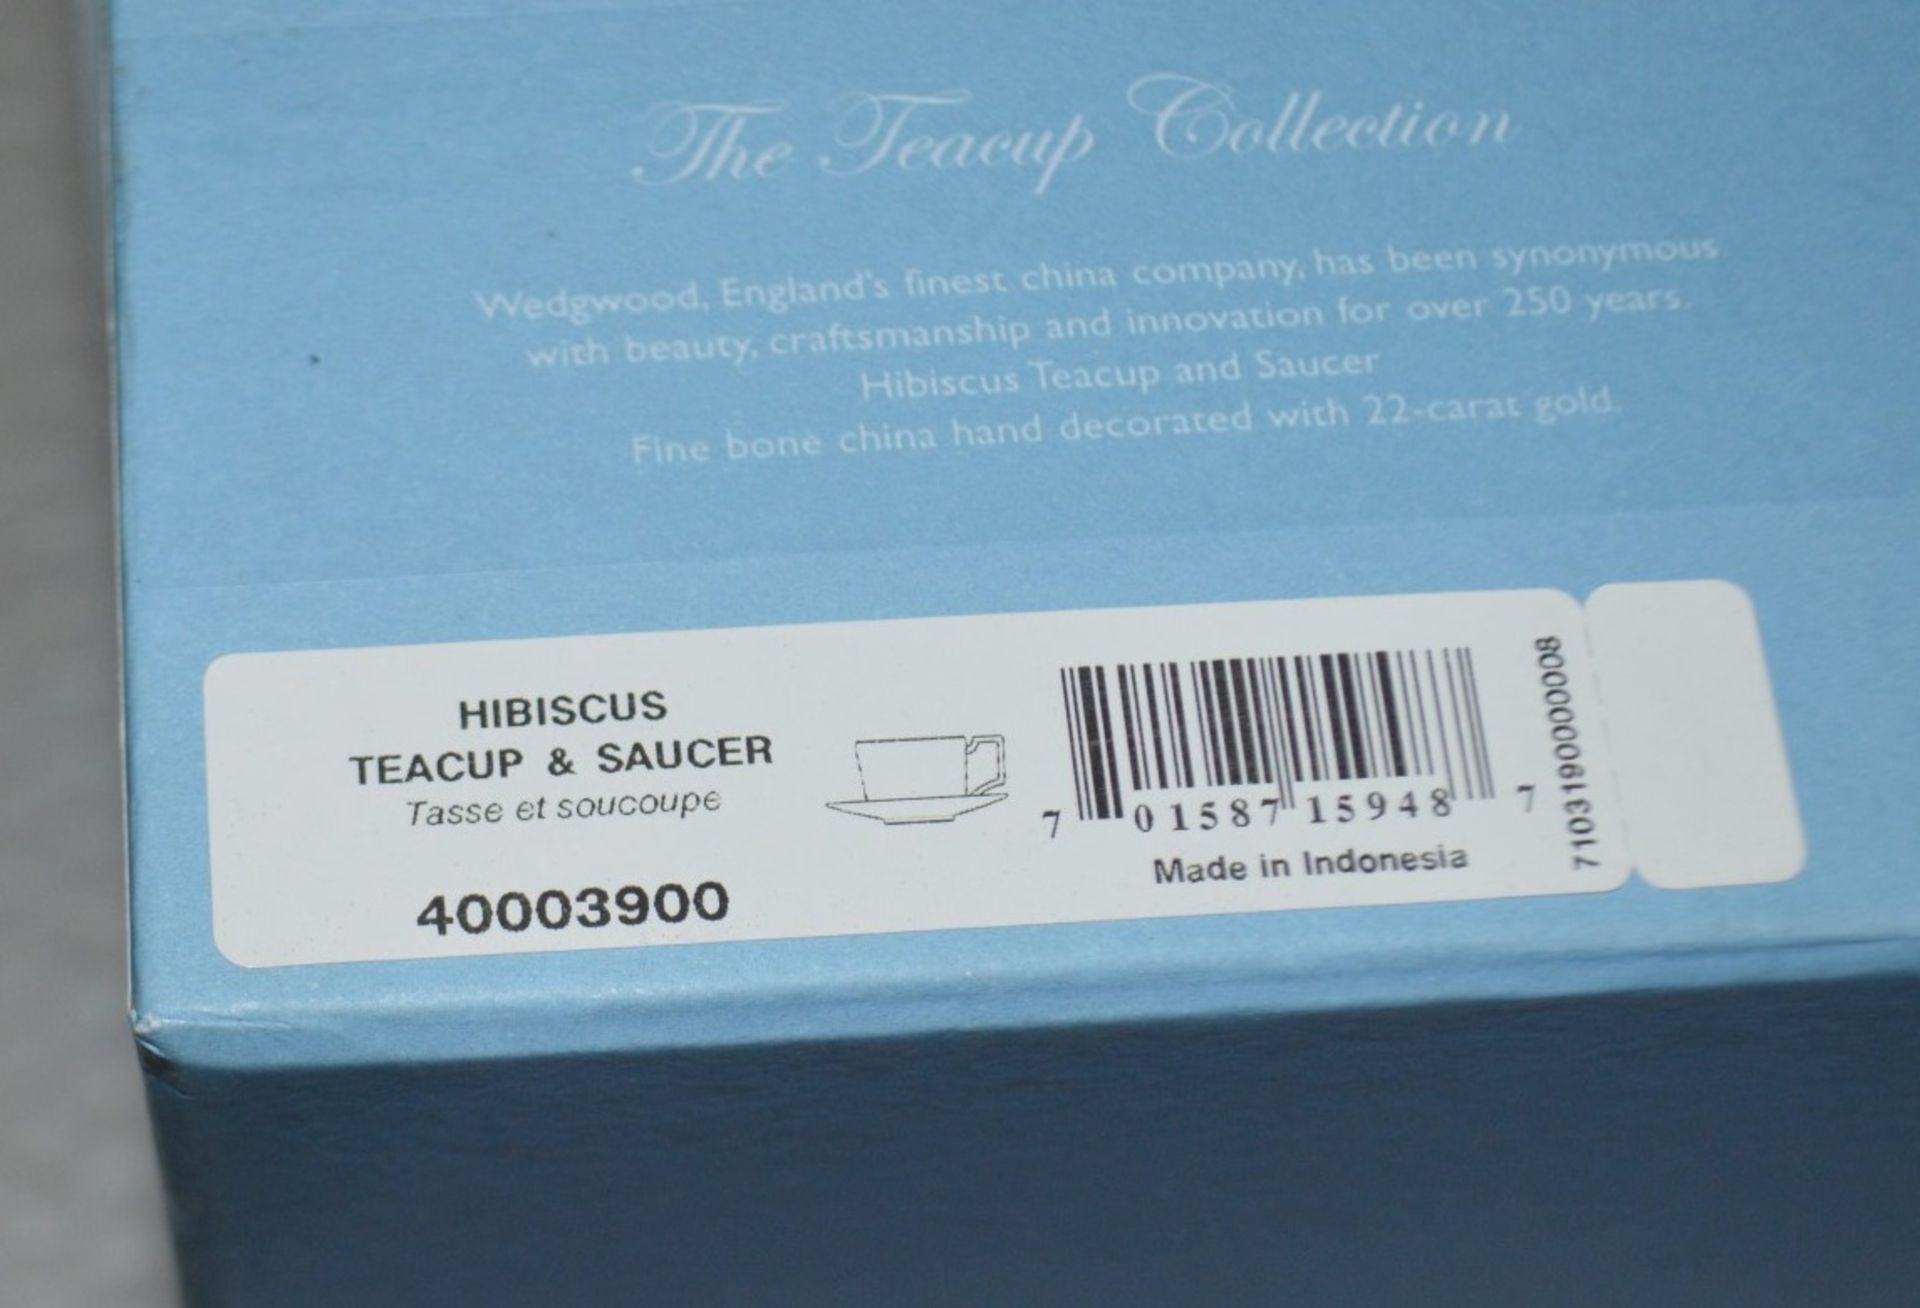 1 x WEDGWOOD 'Hibiscus' Bone China Teacup and Saucer - Original RRP £75.00 - Unused Boxed Stock - - Image 5 of 10